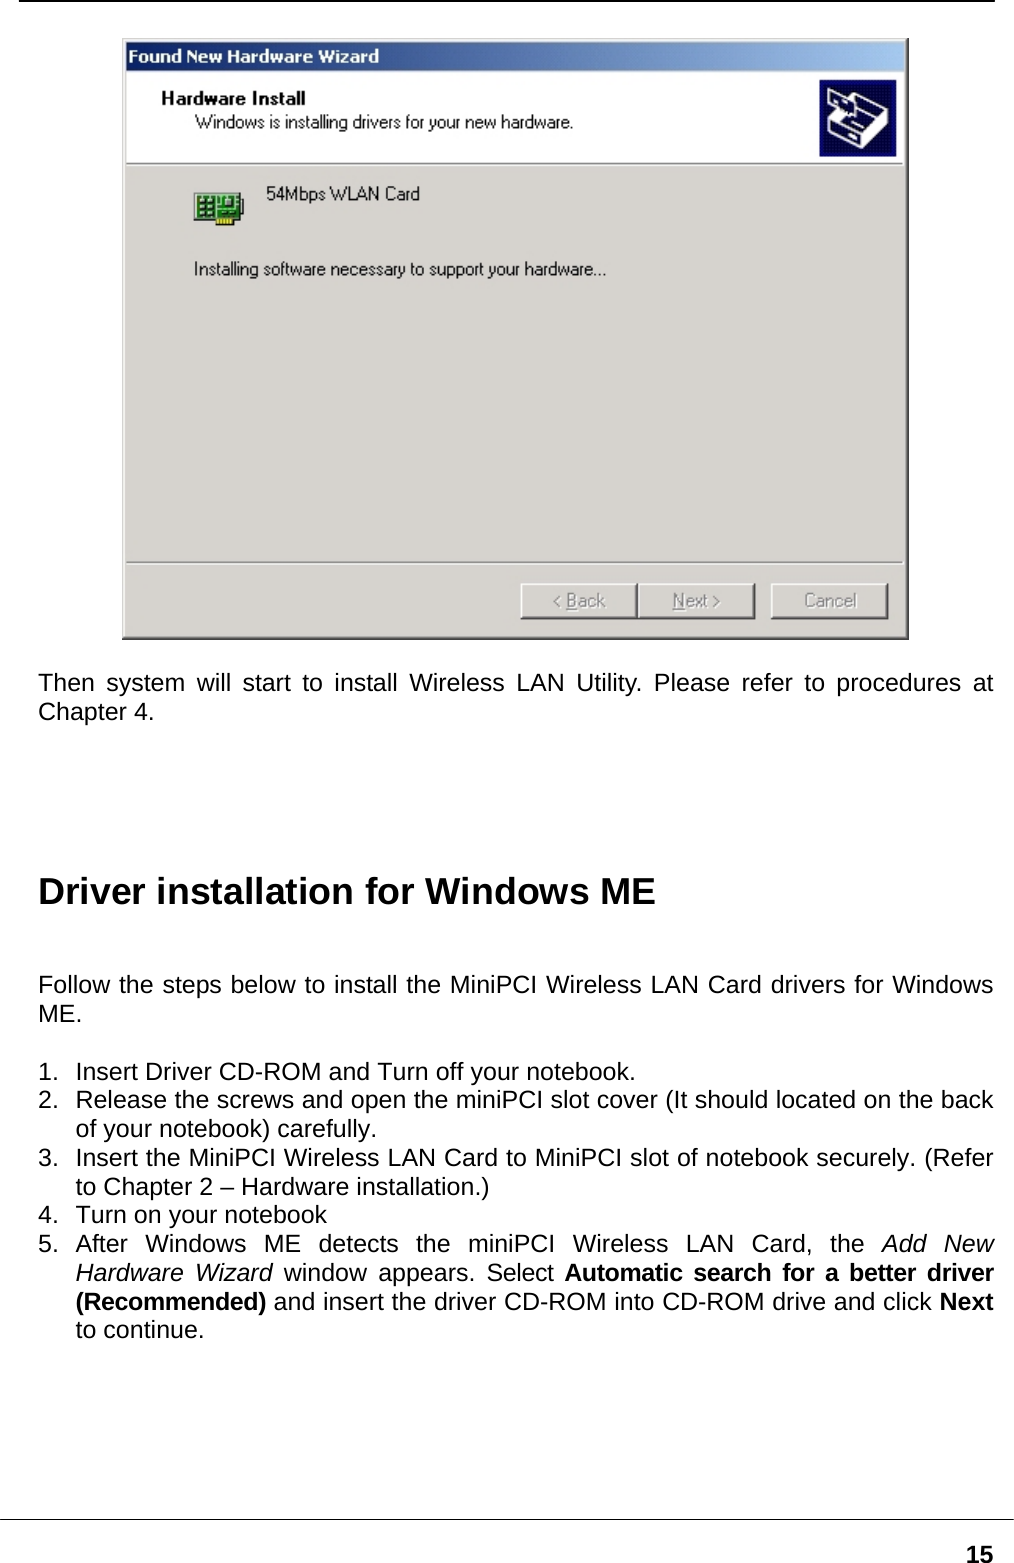   15  Then system will start to install Wireless LAN Utility. Please refer to procedures at Chapter 4.      Driver installation for Windows ME   Follow the steps below to install the MiniPCI Wireless LAN Card drivers for Windows ME.  1.  Insert Driver CD-ROM and Turn off your notebook. 2.  Release the screws and open the miniPCI slot cover (It should located on the back of your notebook) carefully. 3.  Insert the MiniPCI Wireless LAN Card to MiniPCI slot of notebook securely. (Refer to Chapter 2 – Hardware installation.) 4.  Turn on your notebook 5. After Windows ME detects the miniPCI Wireless LAN Card, the Add New Hardware Wizard window appears. Select Automatic search for a better driver (Recommended) and insert the driver CD-ROM into CD-ROM drive and click Next to continue.   